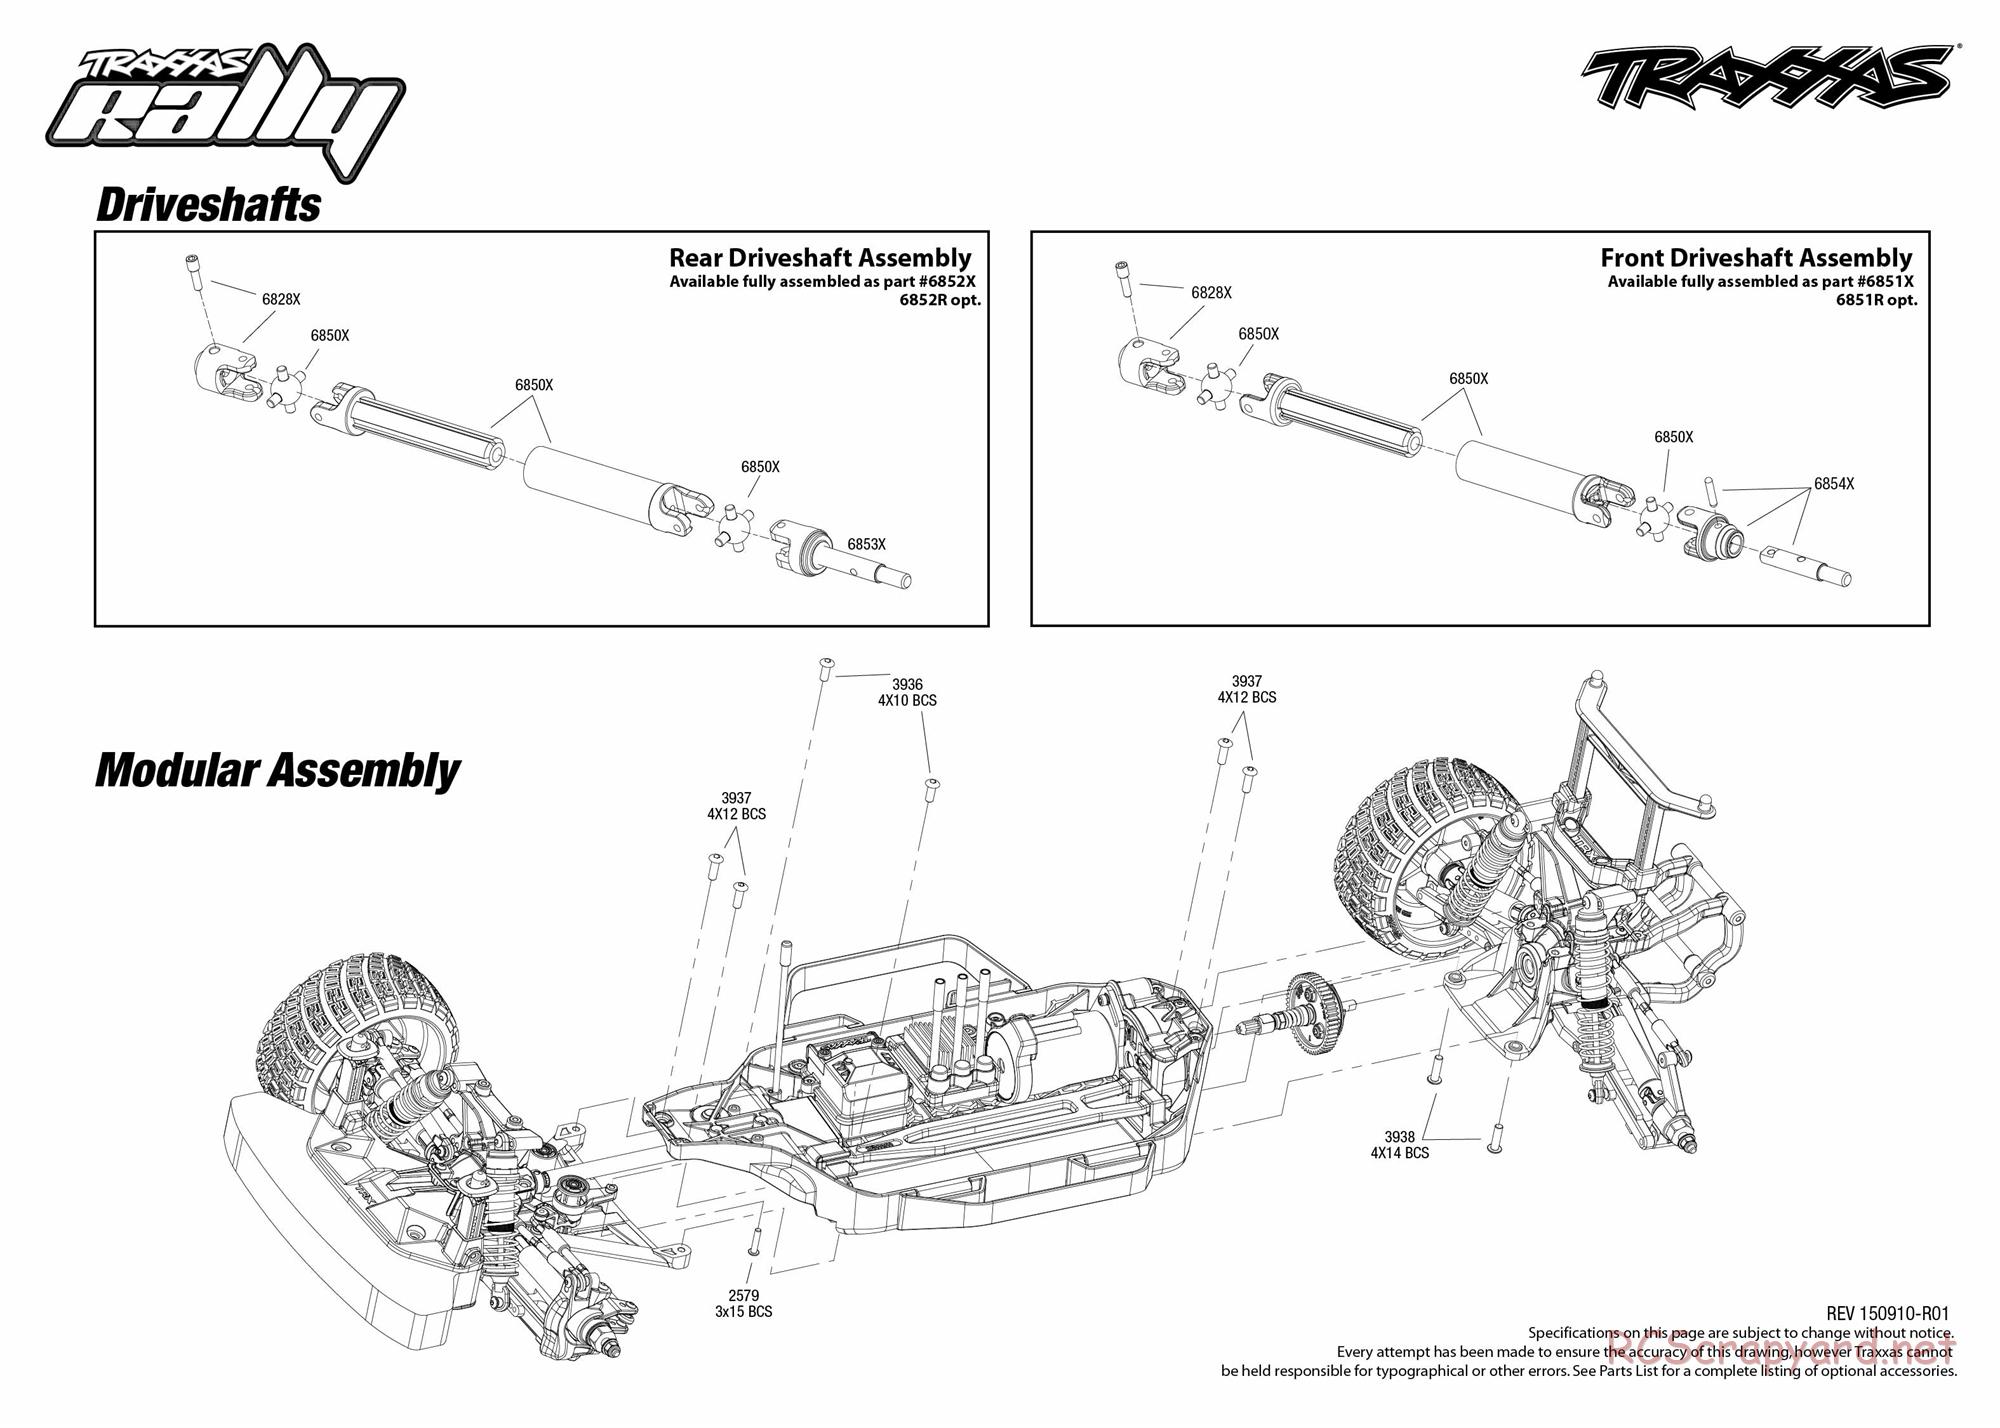 Traxxas - Rally (2015) - Exploded Views - Page 2